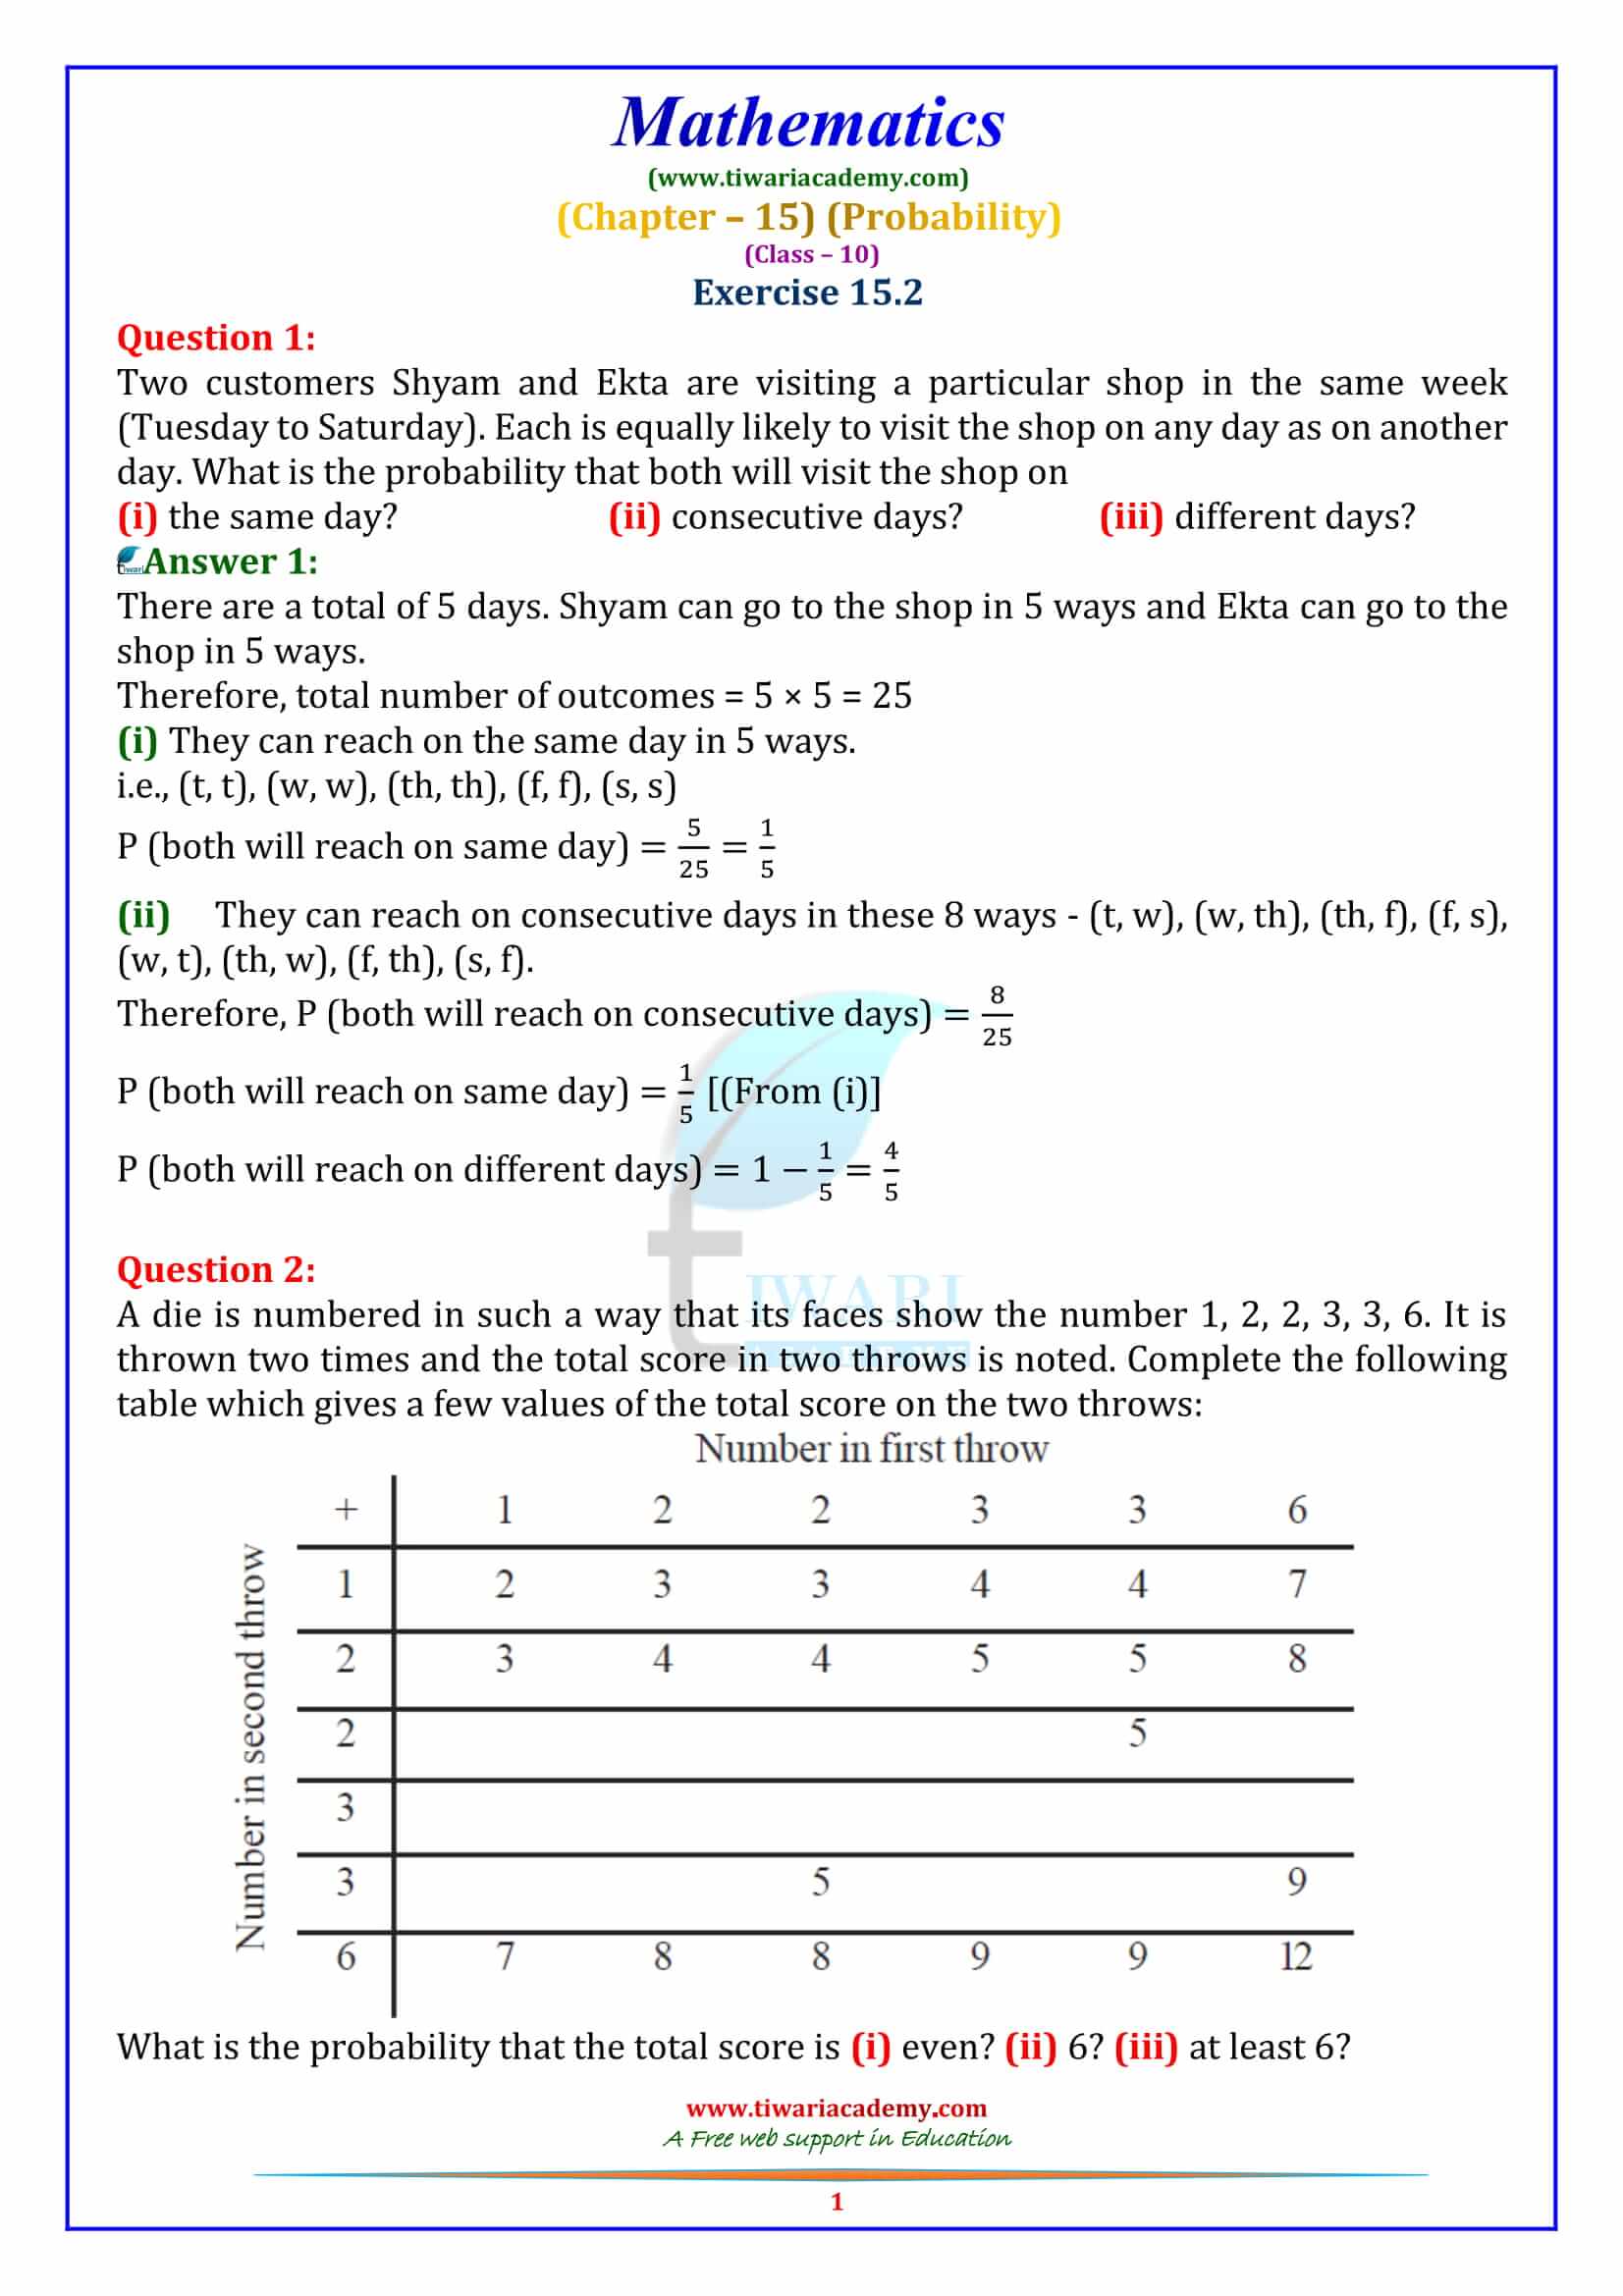 NCERT Solutions for Class 10 Maths Chapter 15 Exercise 15.2 in pdf form